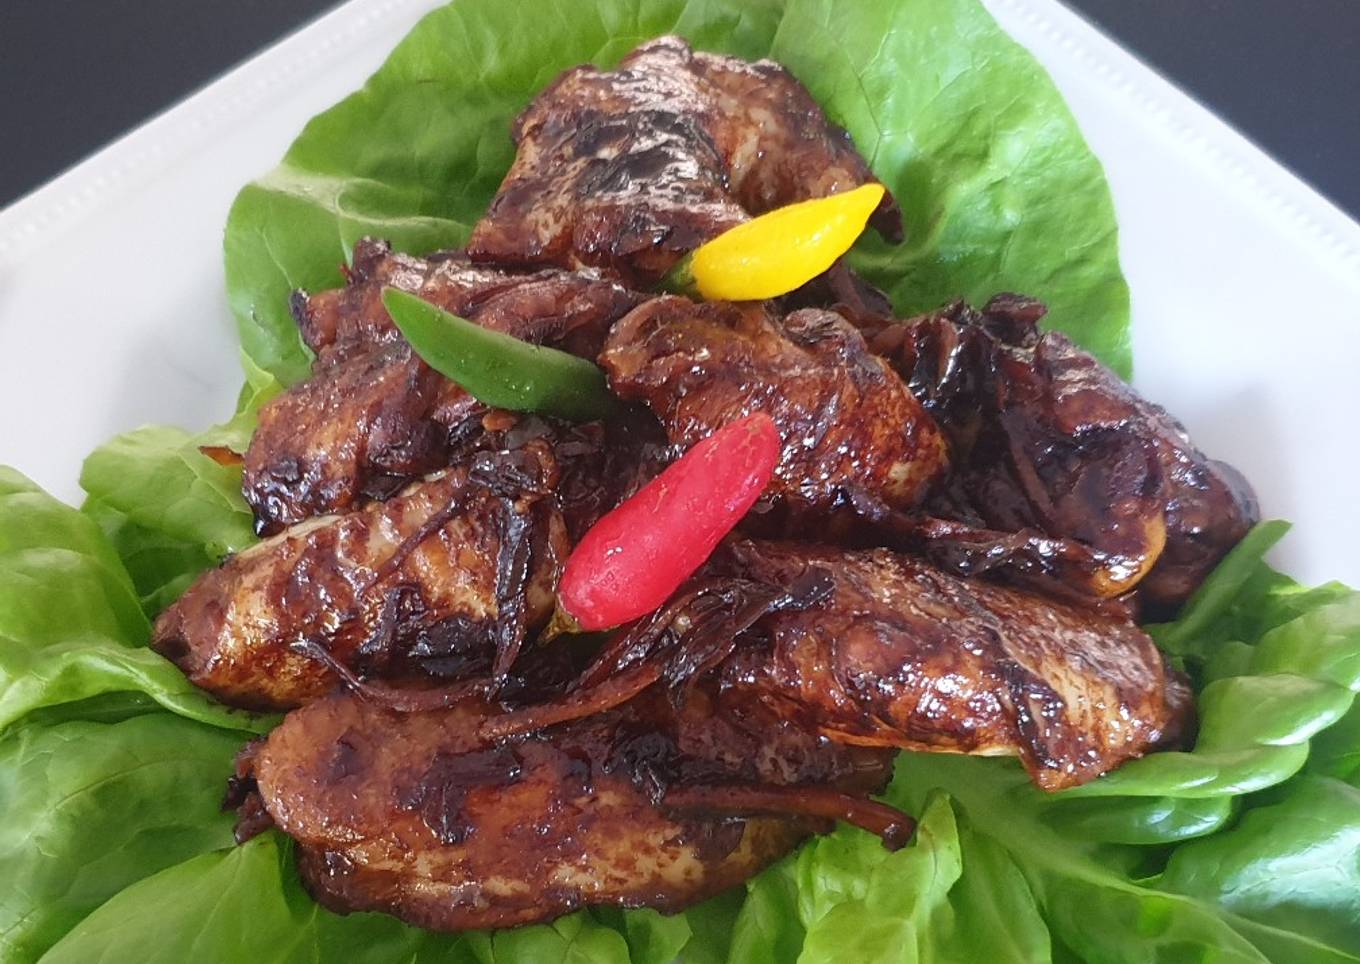 Ginger soy chicken wings